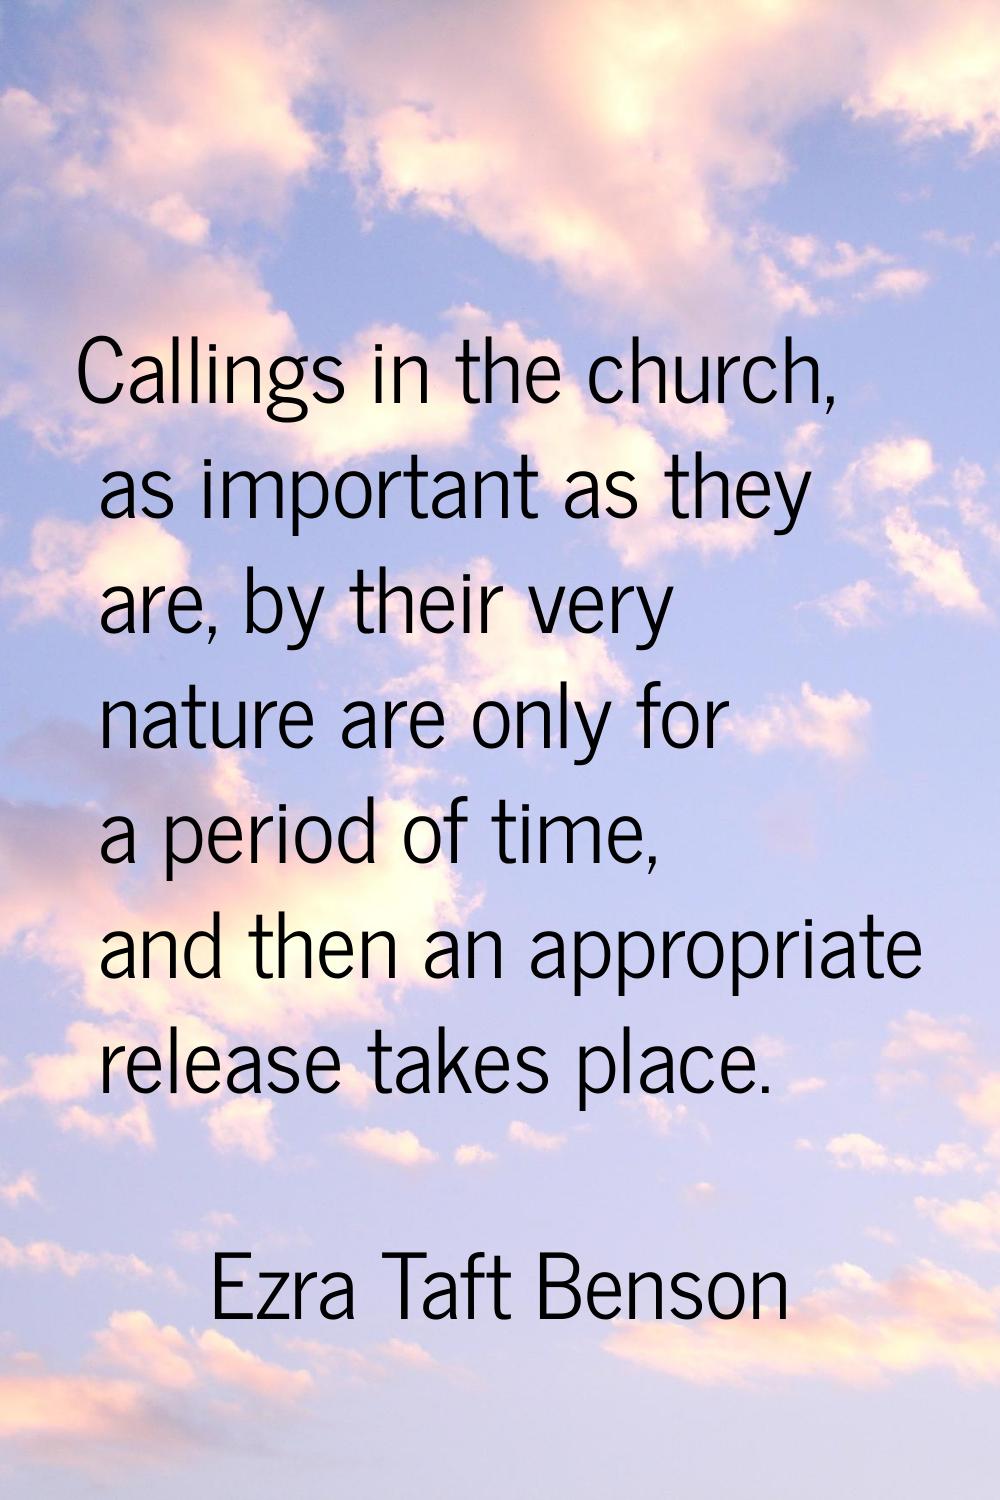 Callings in the church, as important as they are, by their very nature are only for a period of tim